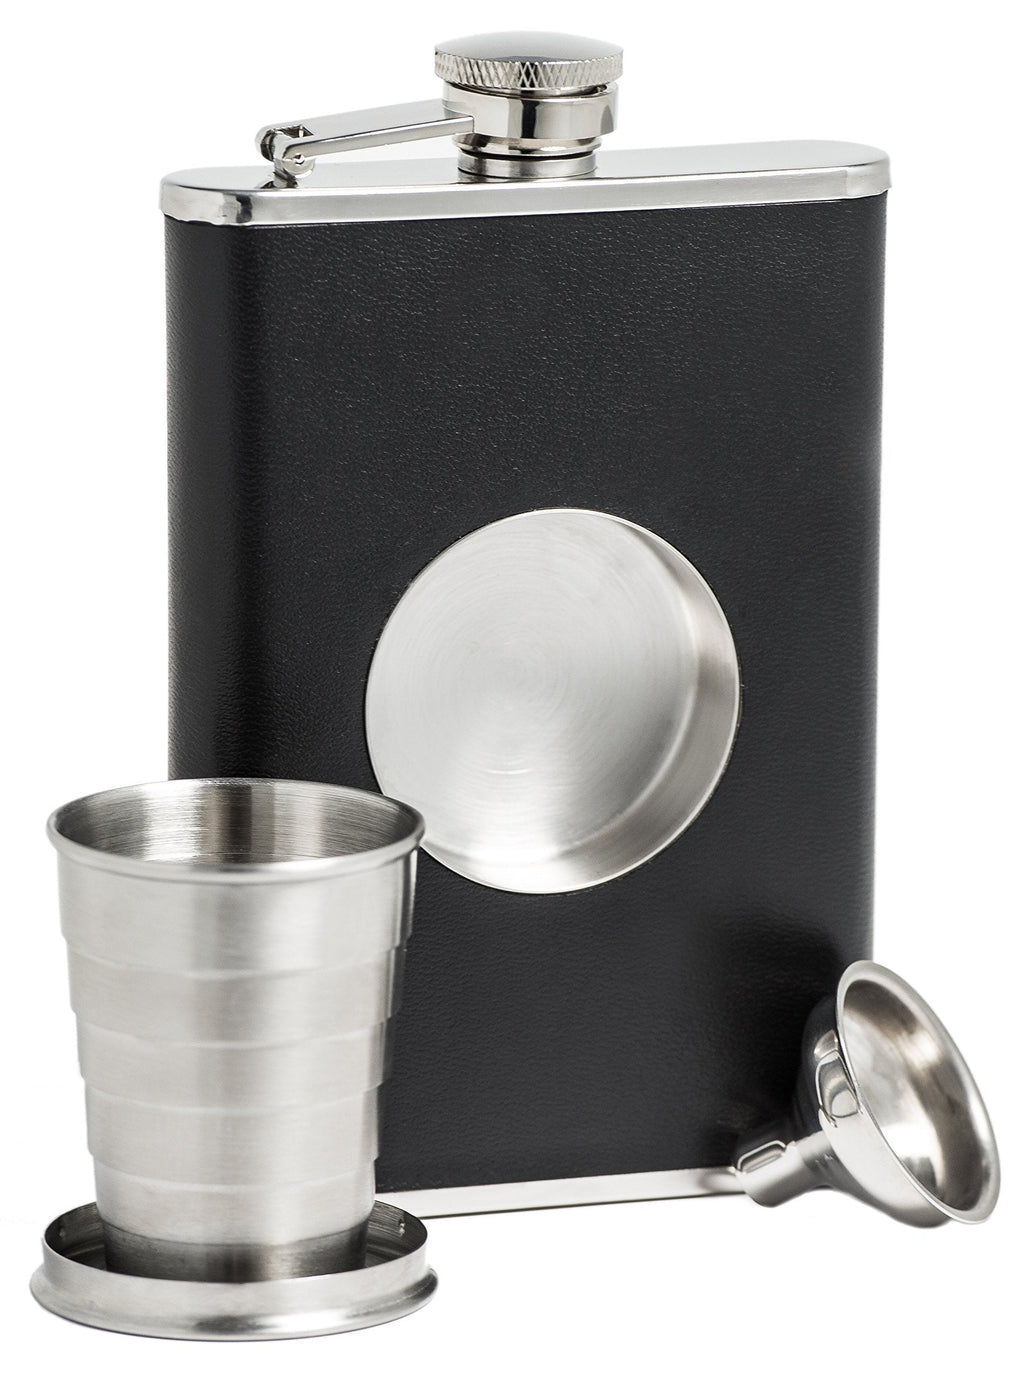  [AUSTRALIA] - Shot Flask - Stainless Steel 8 oz Hip Flask, Built-in Collapsible 2 Oz. Shot Glass & Flask Funnel - Everything You Need to Pour Shots on the Go - BarMe Brand